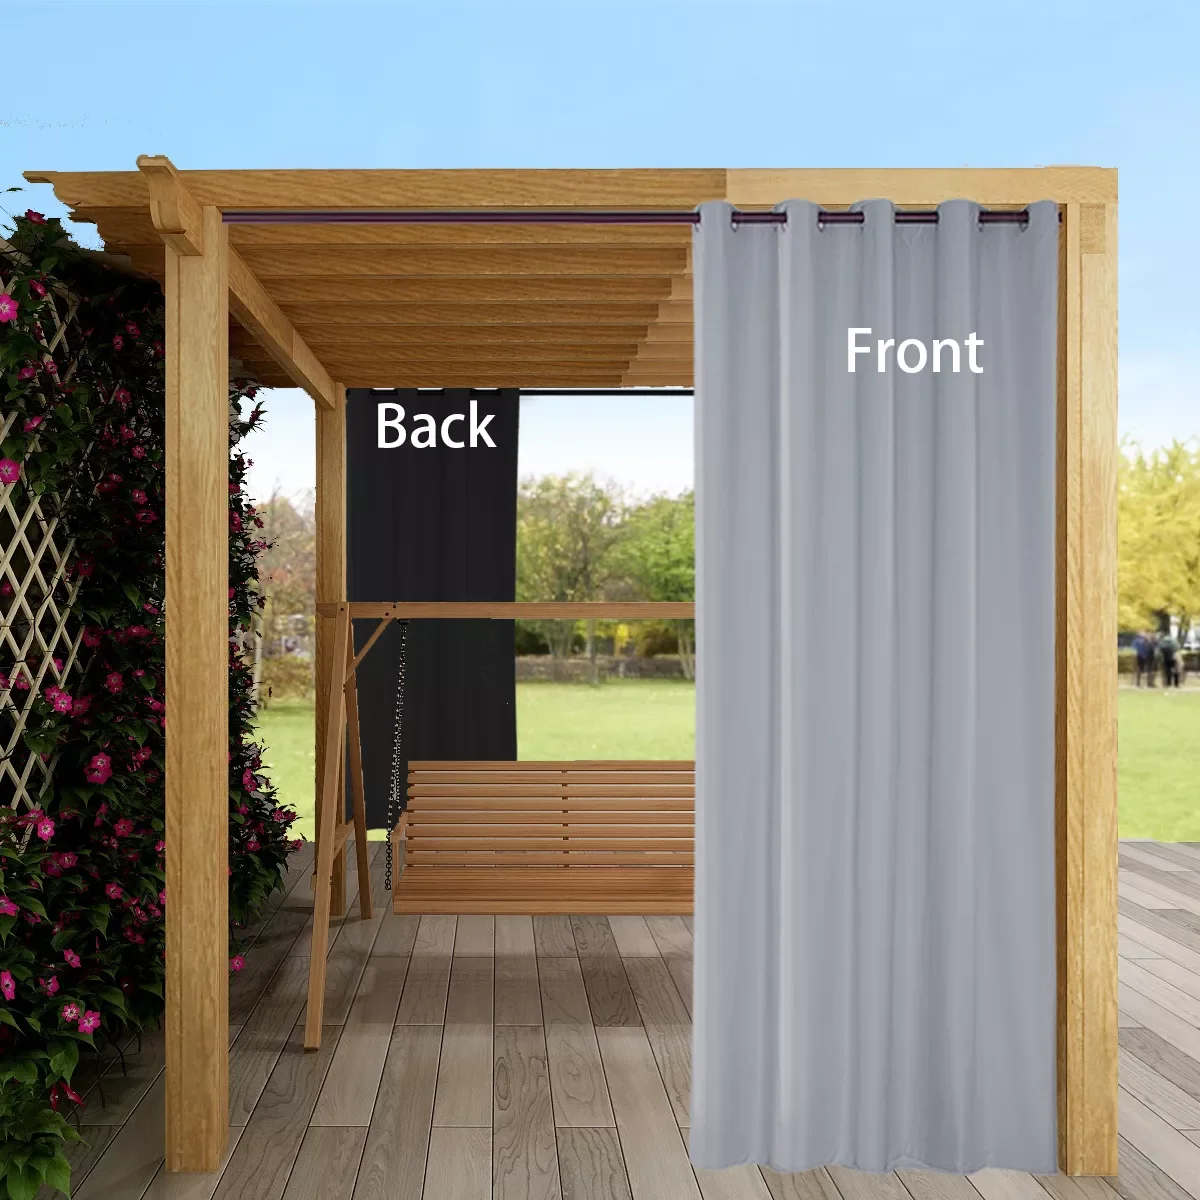 

Outdoor Curtains Waterproof Sunlight Blackout Curtain for Patio Porch Pergola Covered Terrace Gazebo Dock Beach House